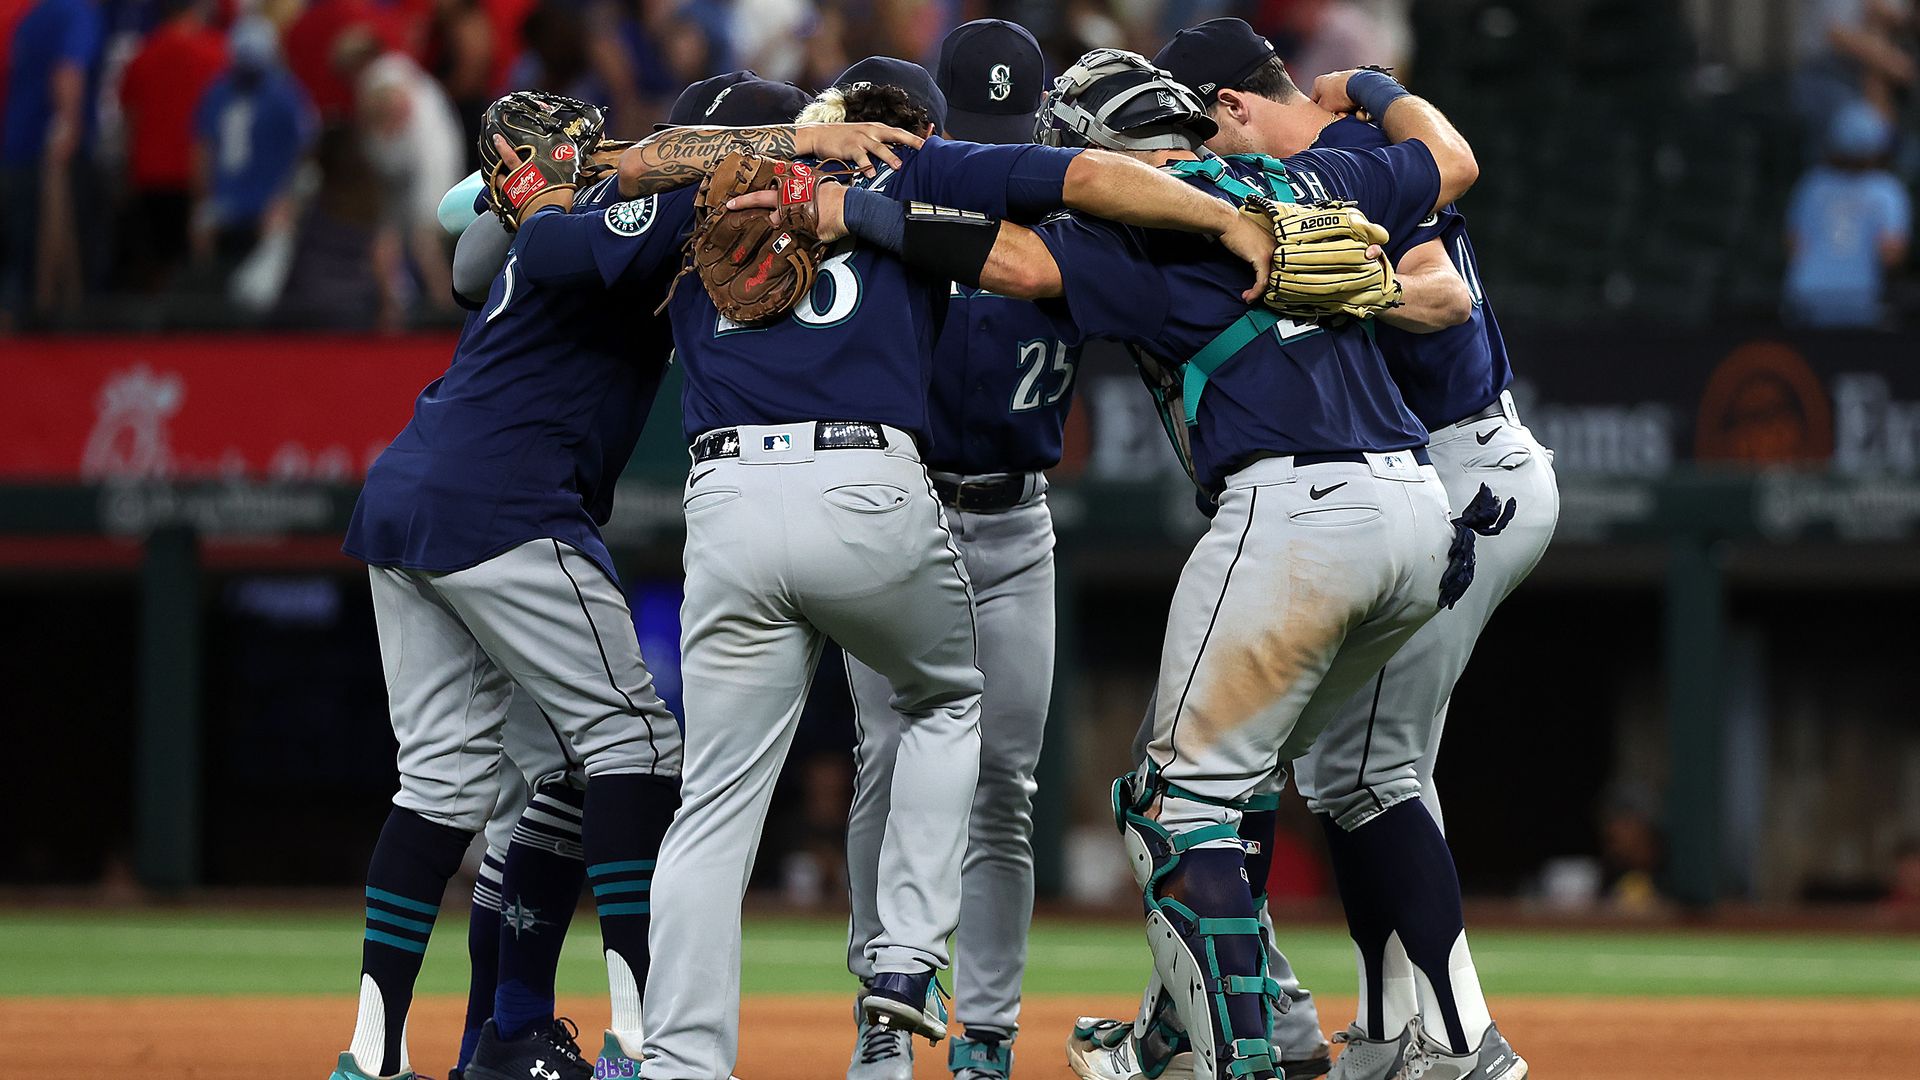 Seattle Mariners players celebrate on the field following their 14th win in a row.